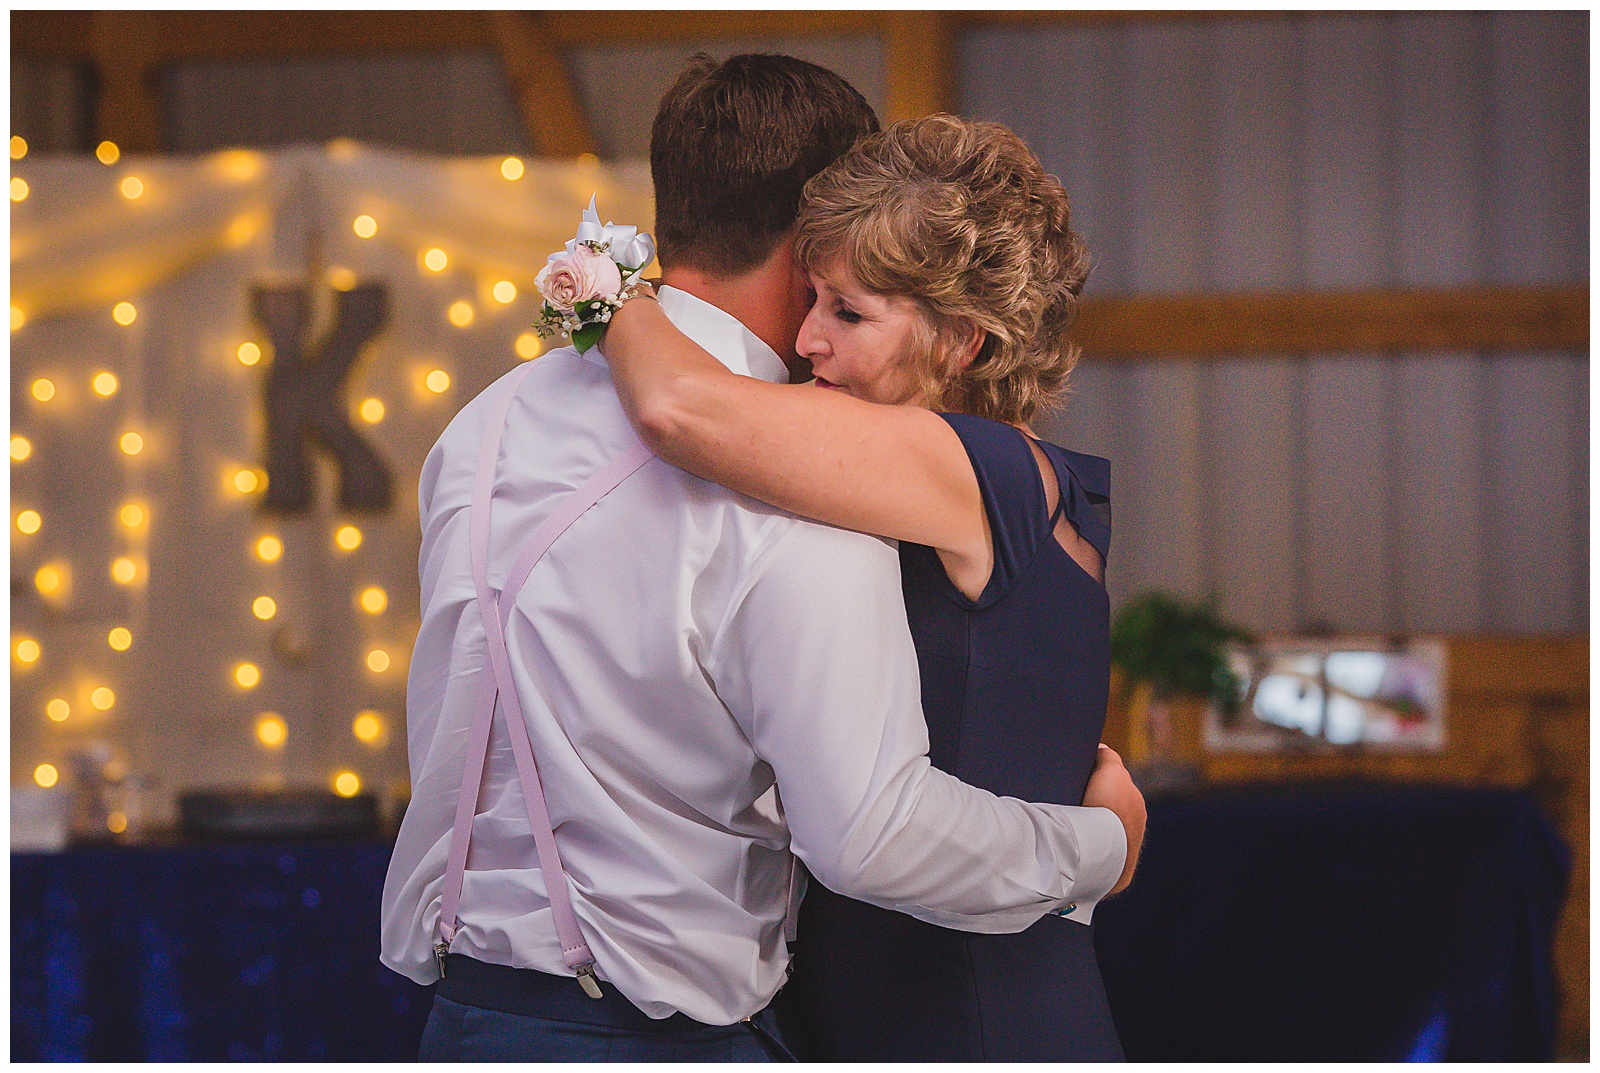 Wedding photography in Lancaster, Kansas, by Kansas City wedding photographers Wisdom-Watson Weddings.